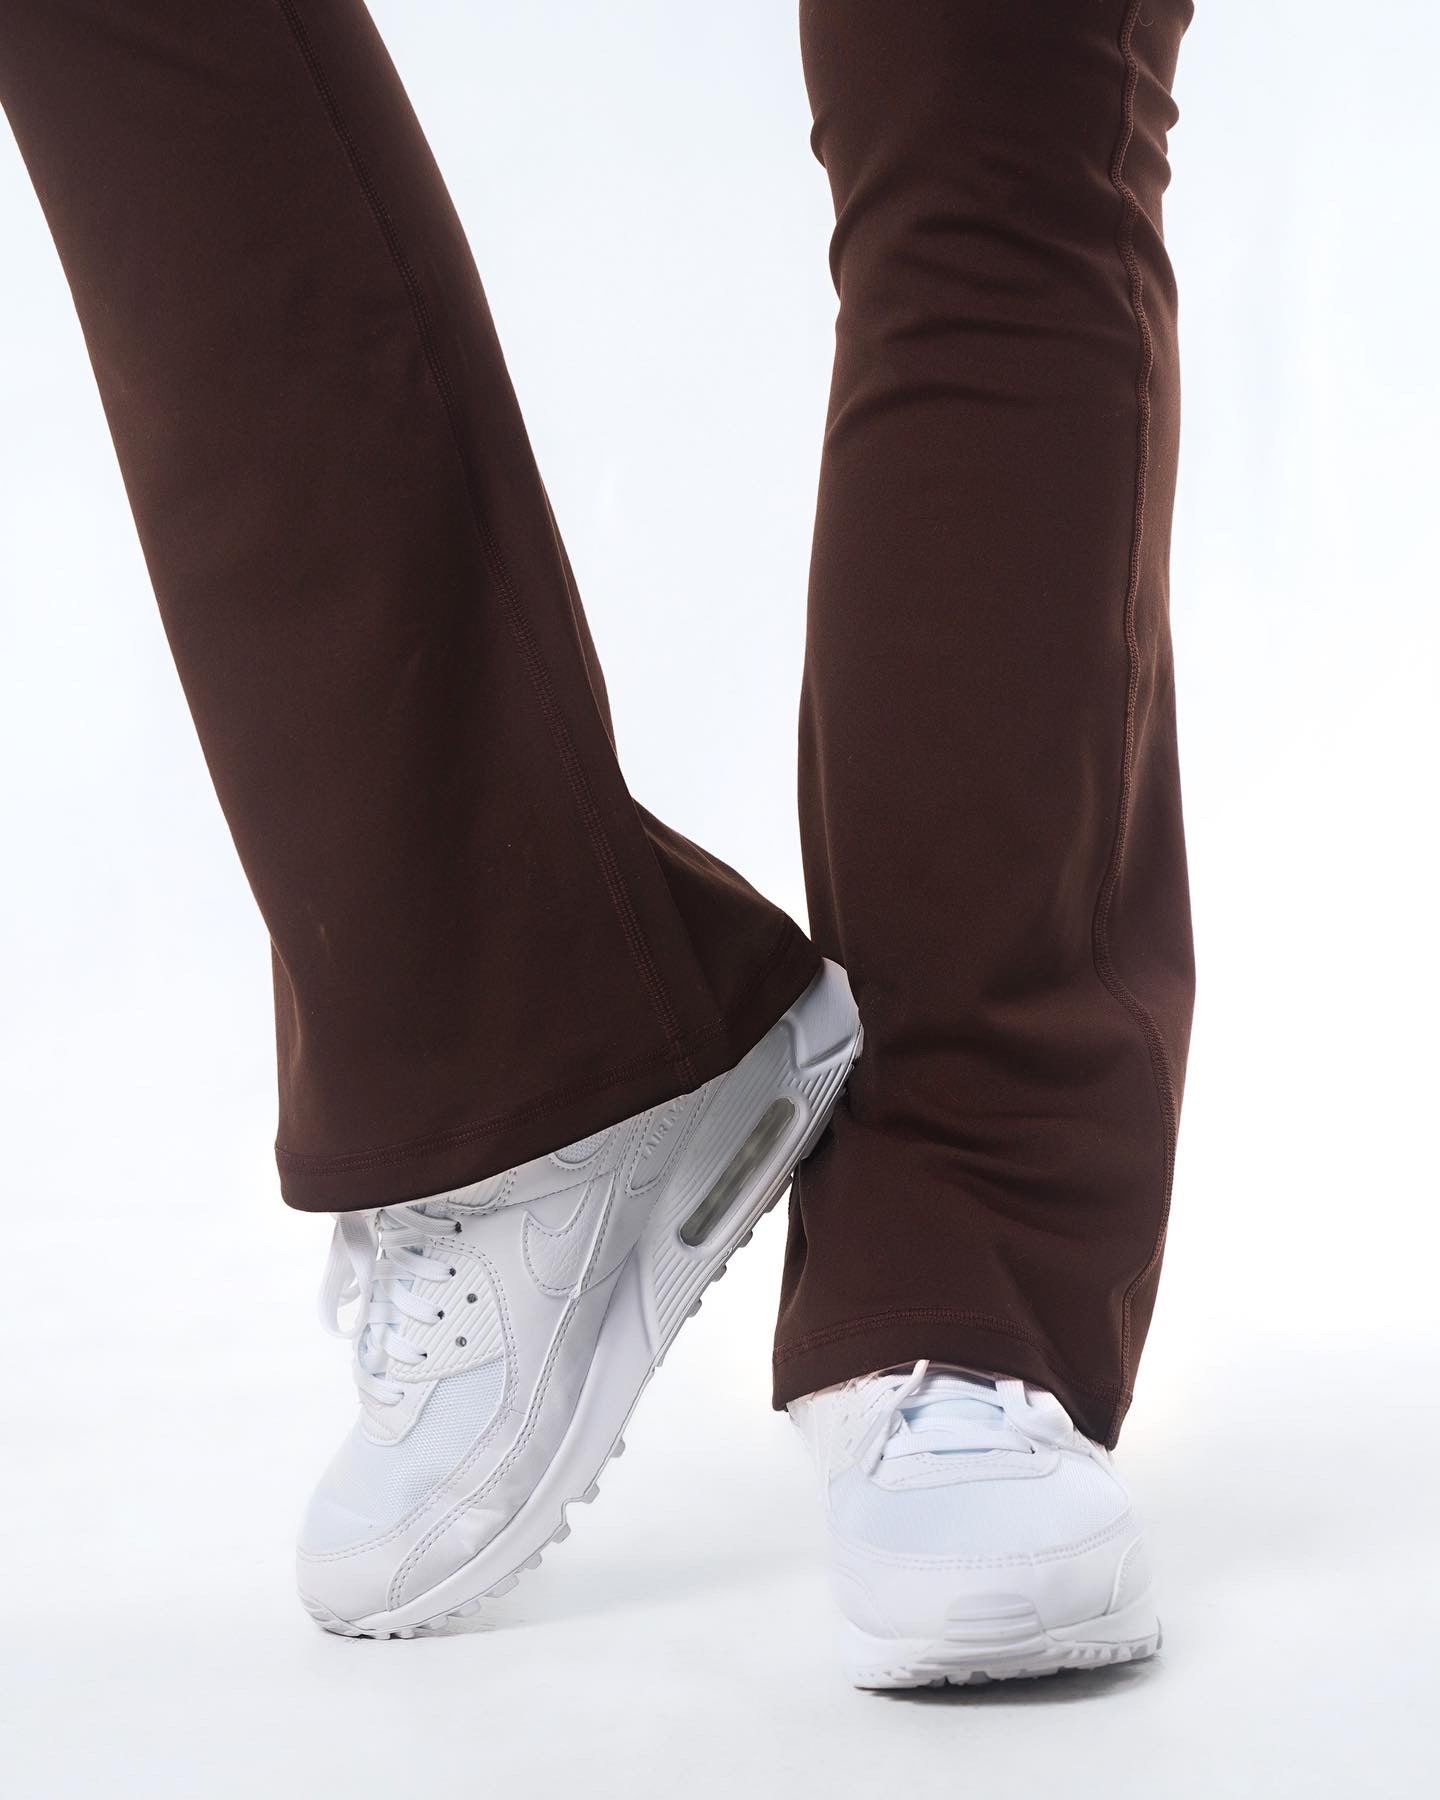 The Flare Pant - Mocha Brown